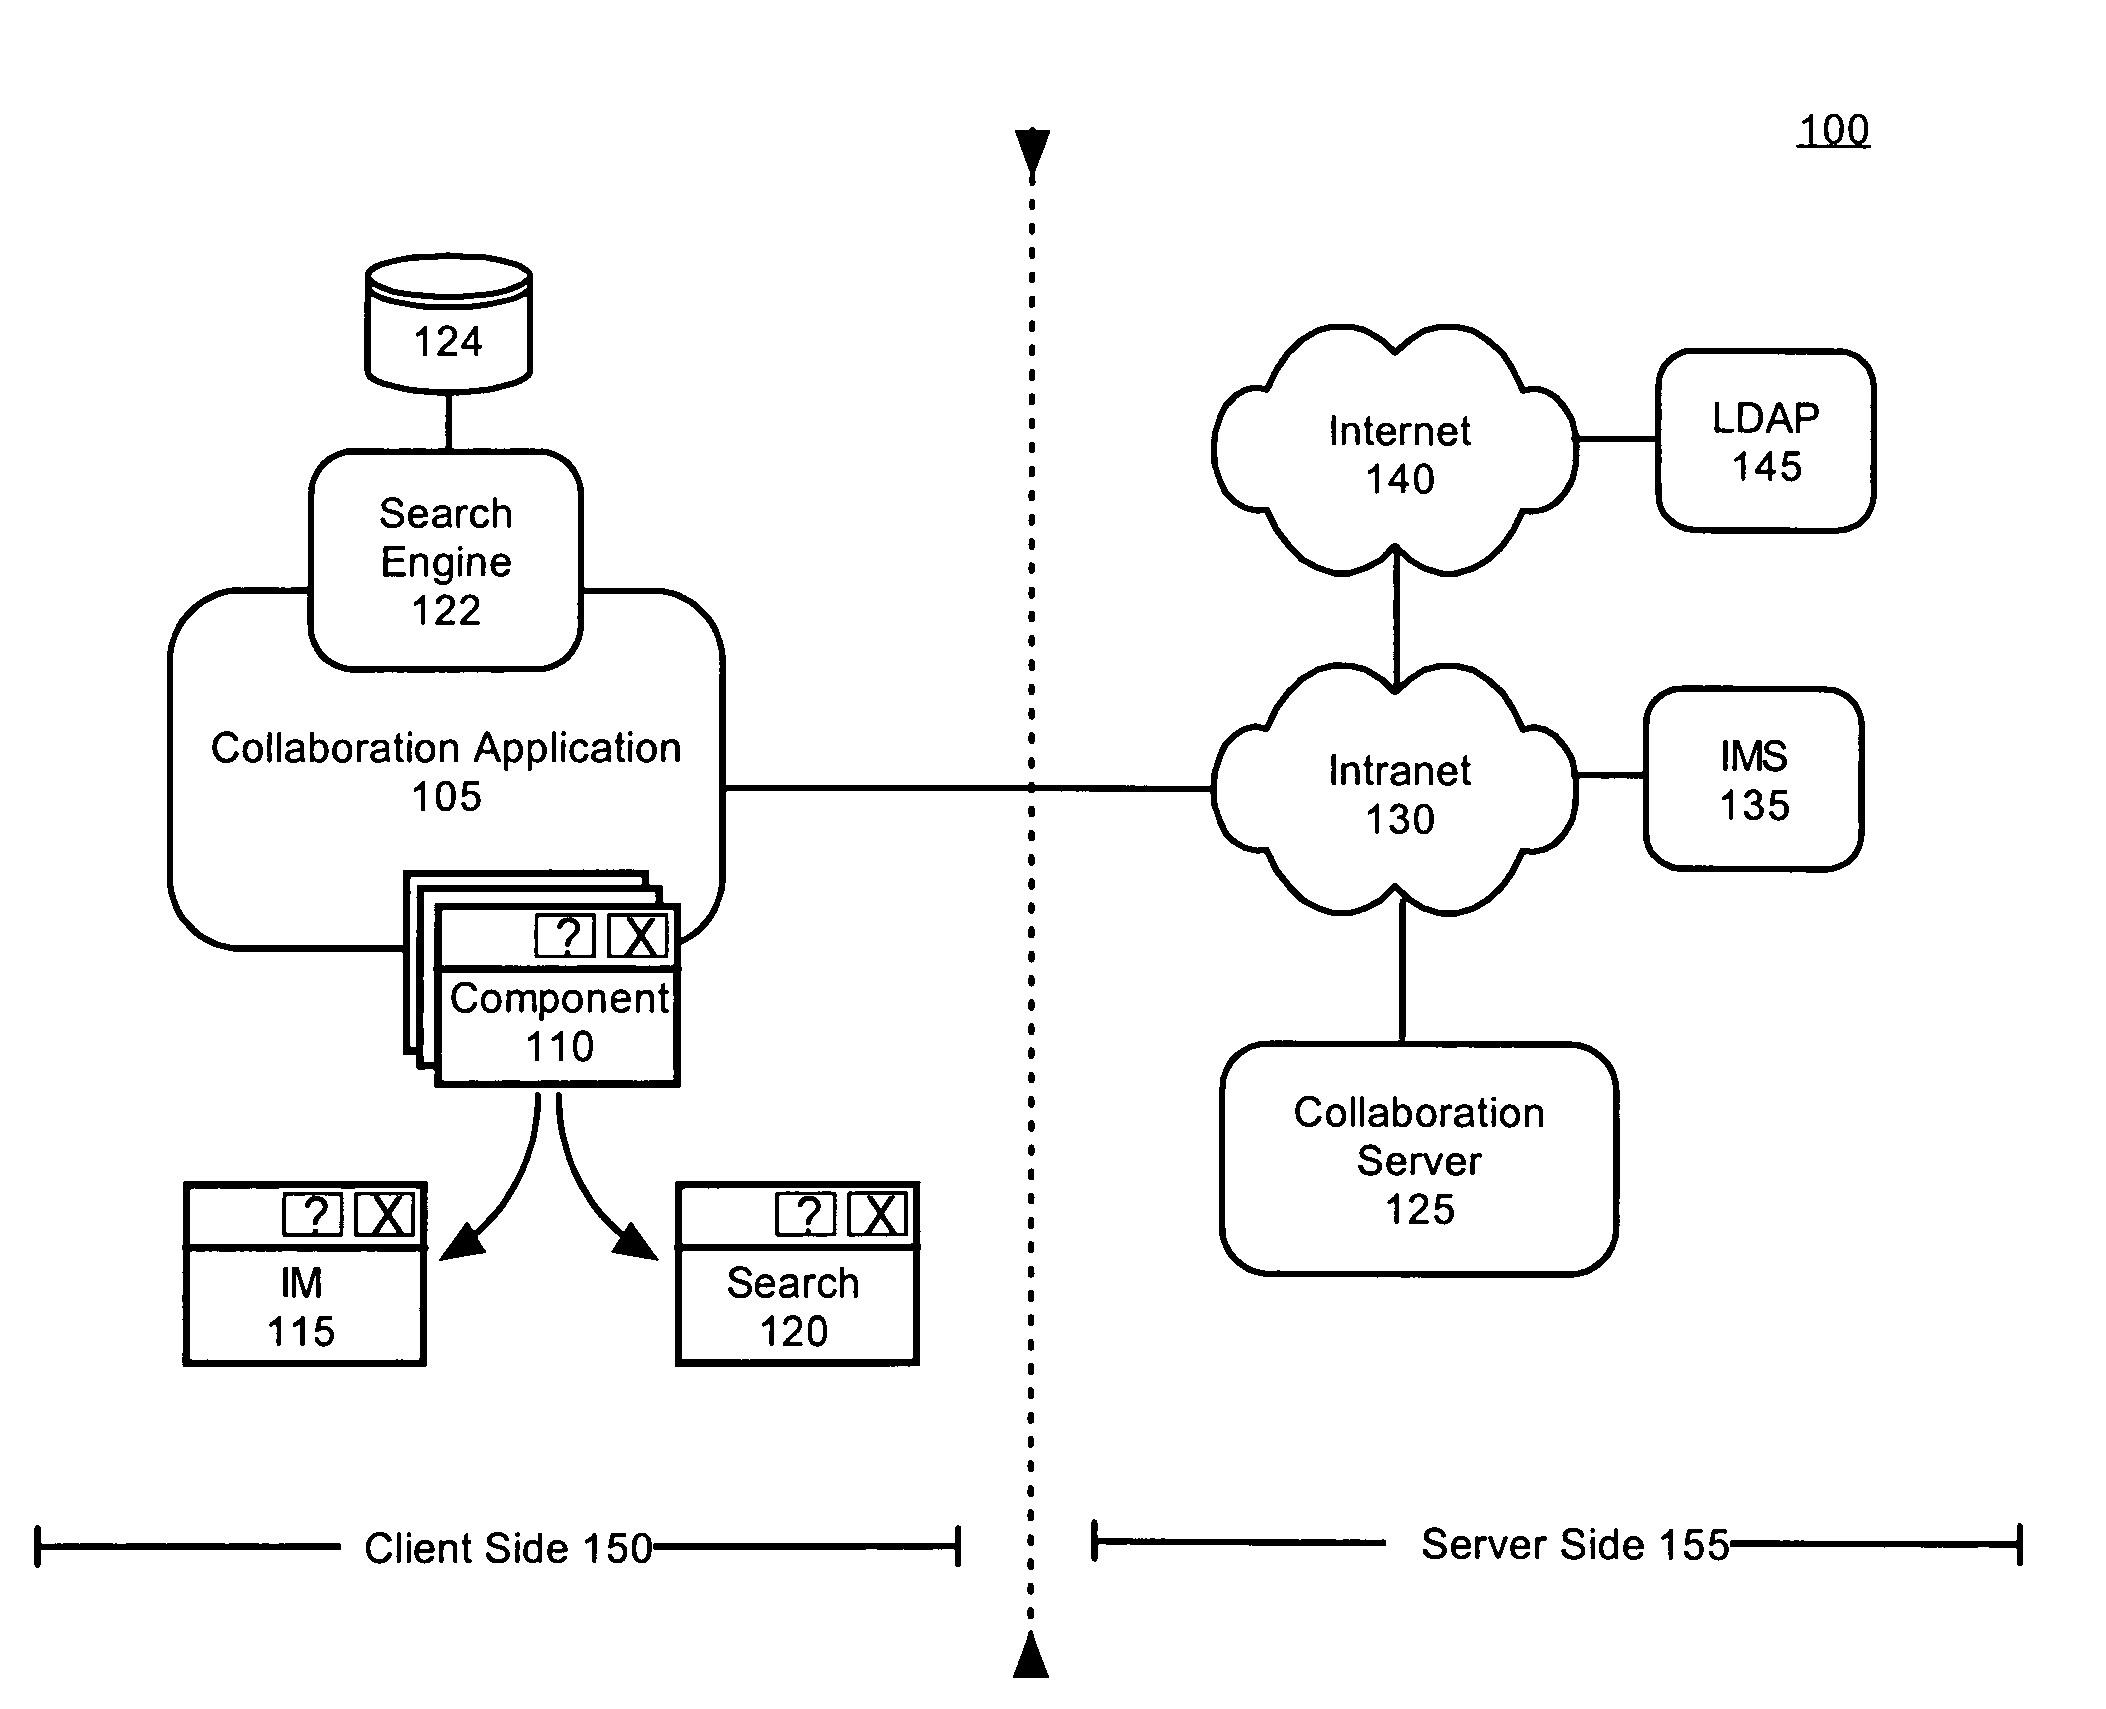 Personnel search enhancement for collaborative computing